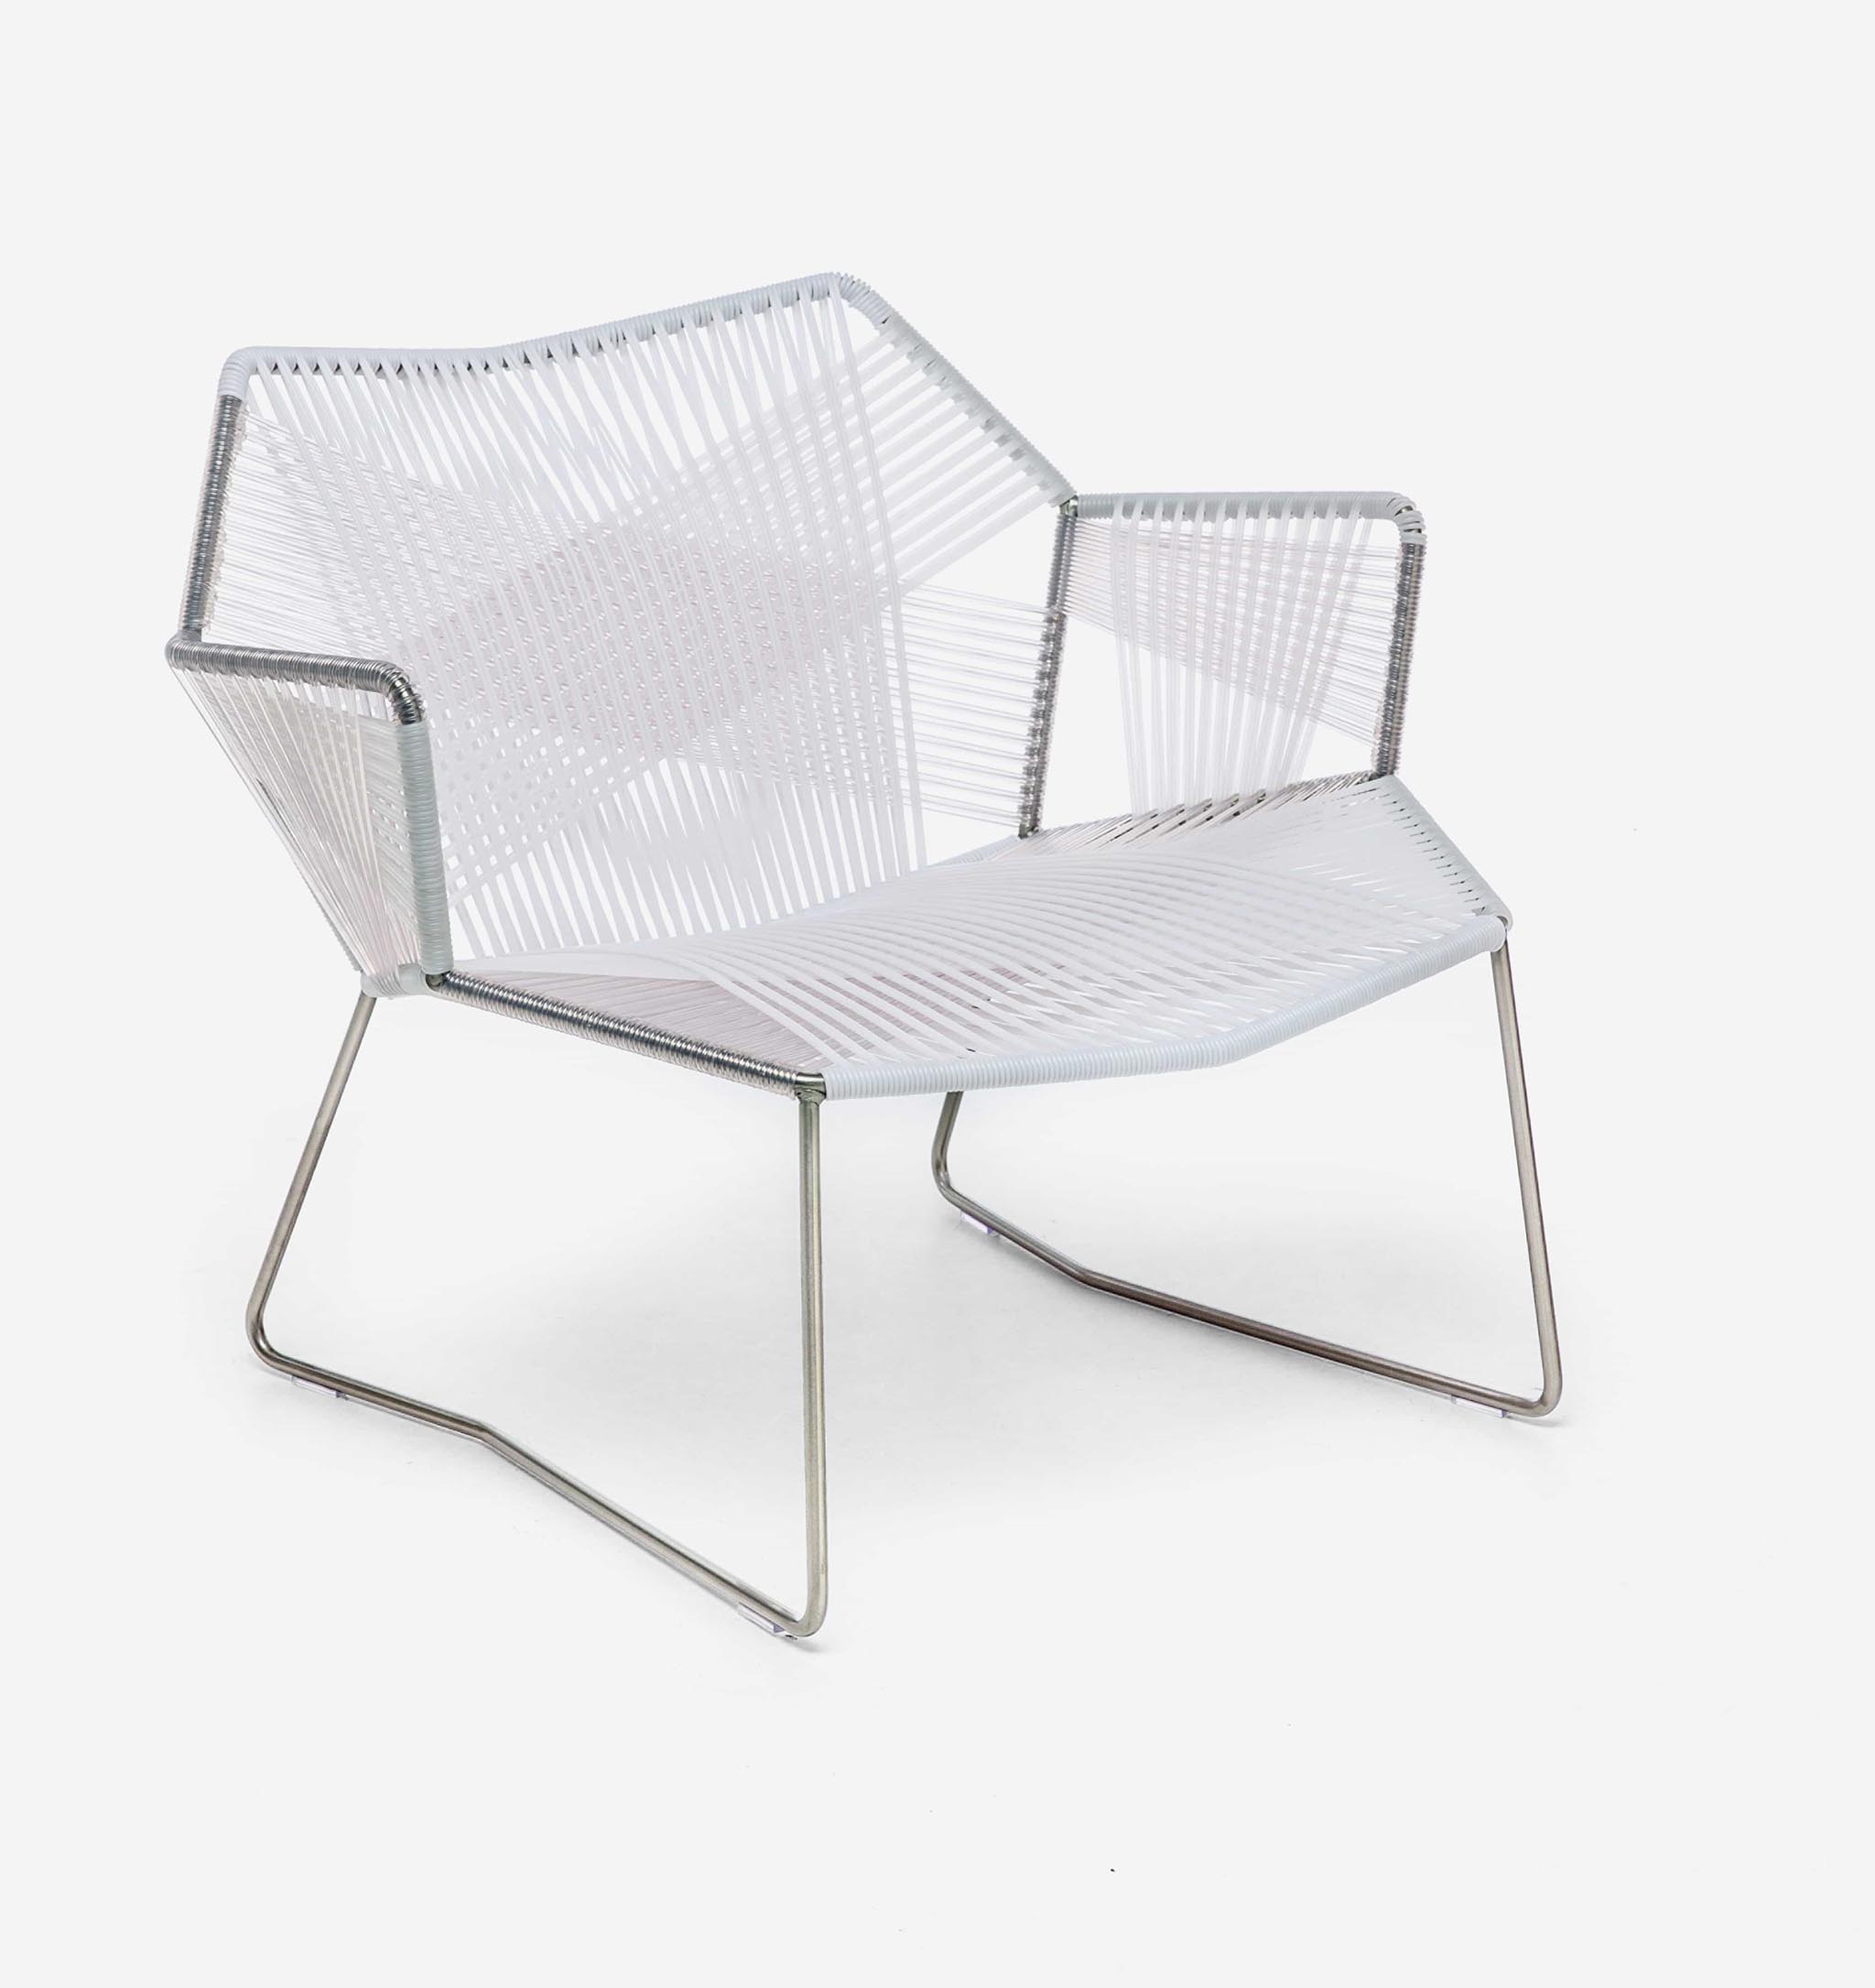 contemporary woven polyester chair with metal frame by Patricia Urquiola